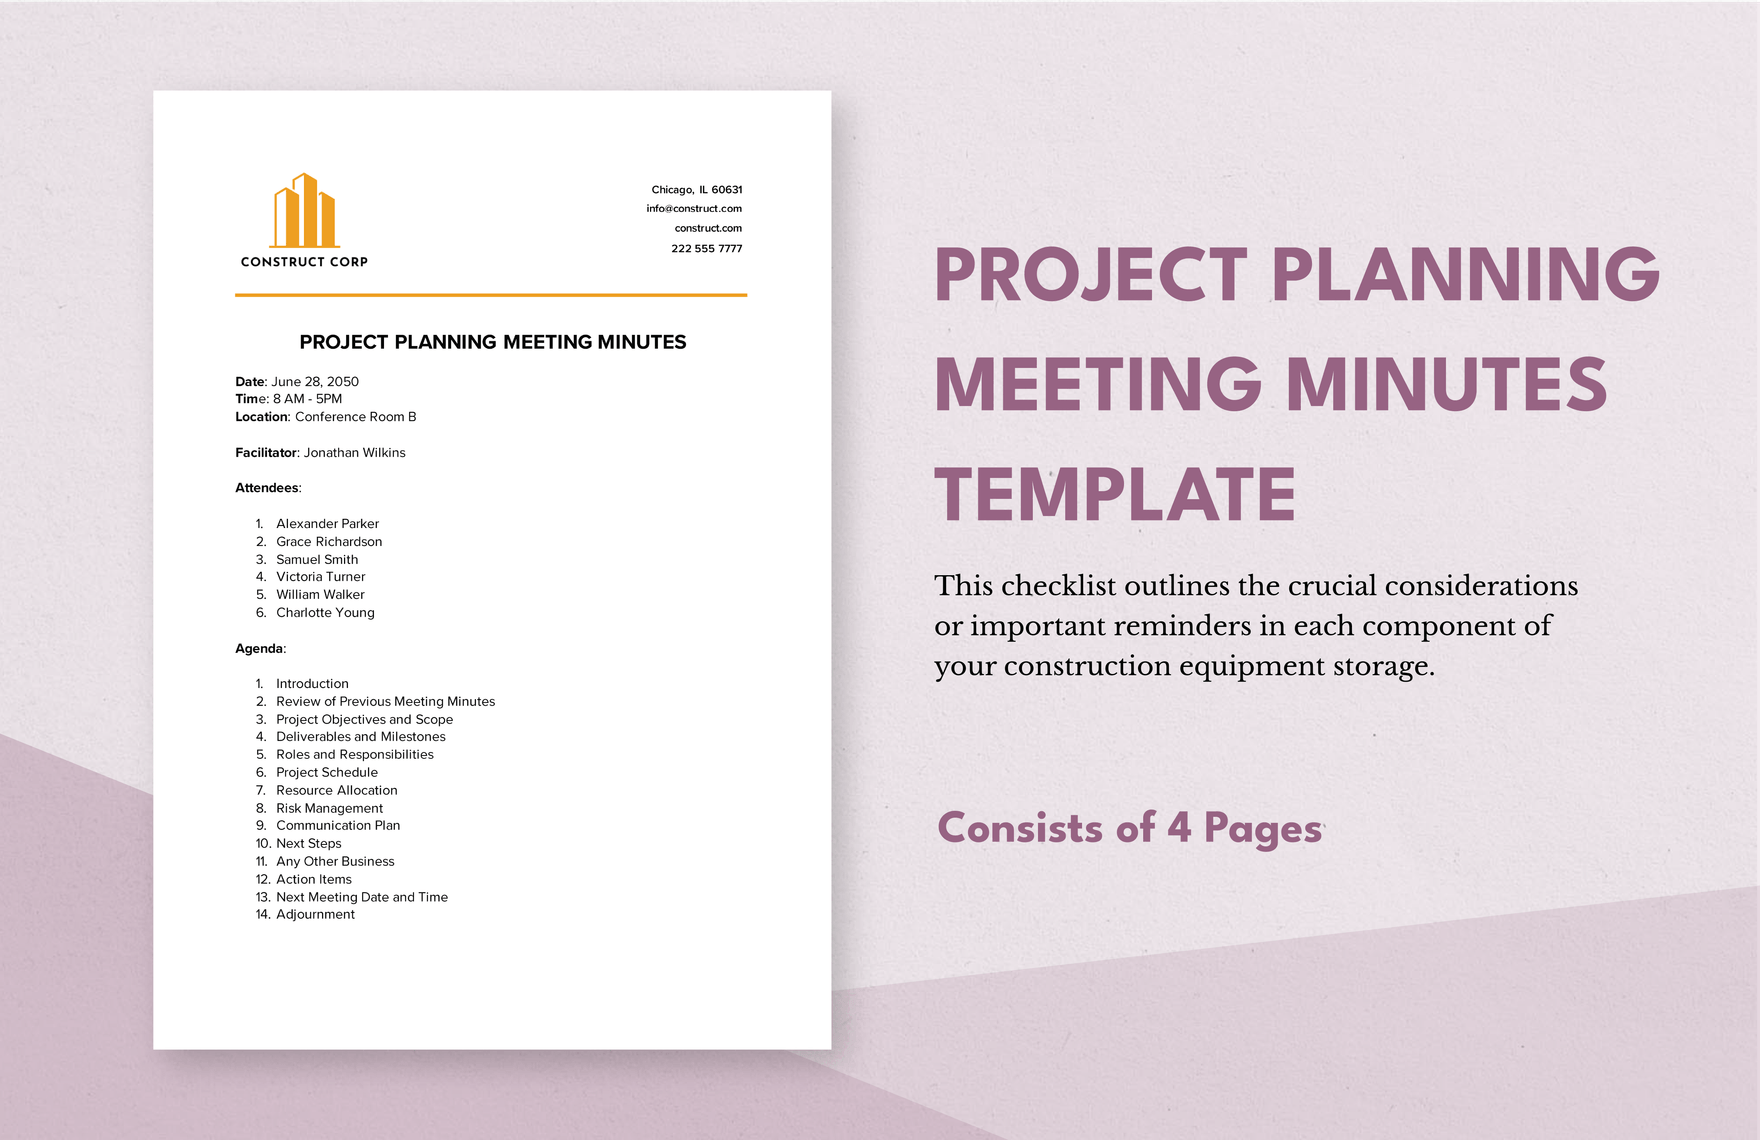 Project Planning Meeting Minutes Template